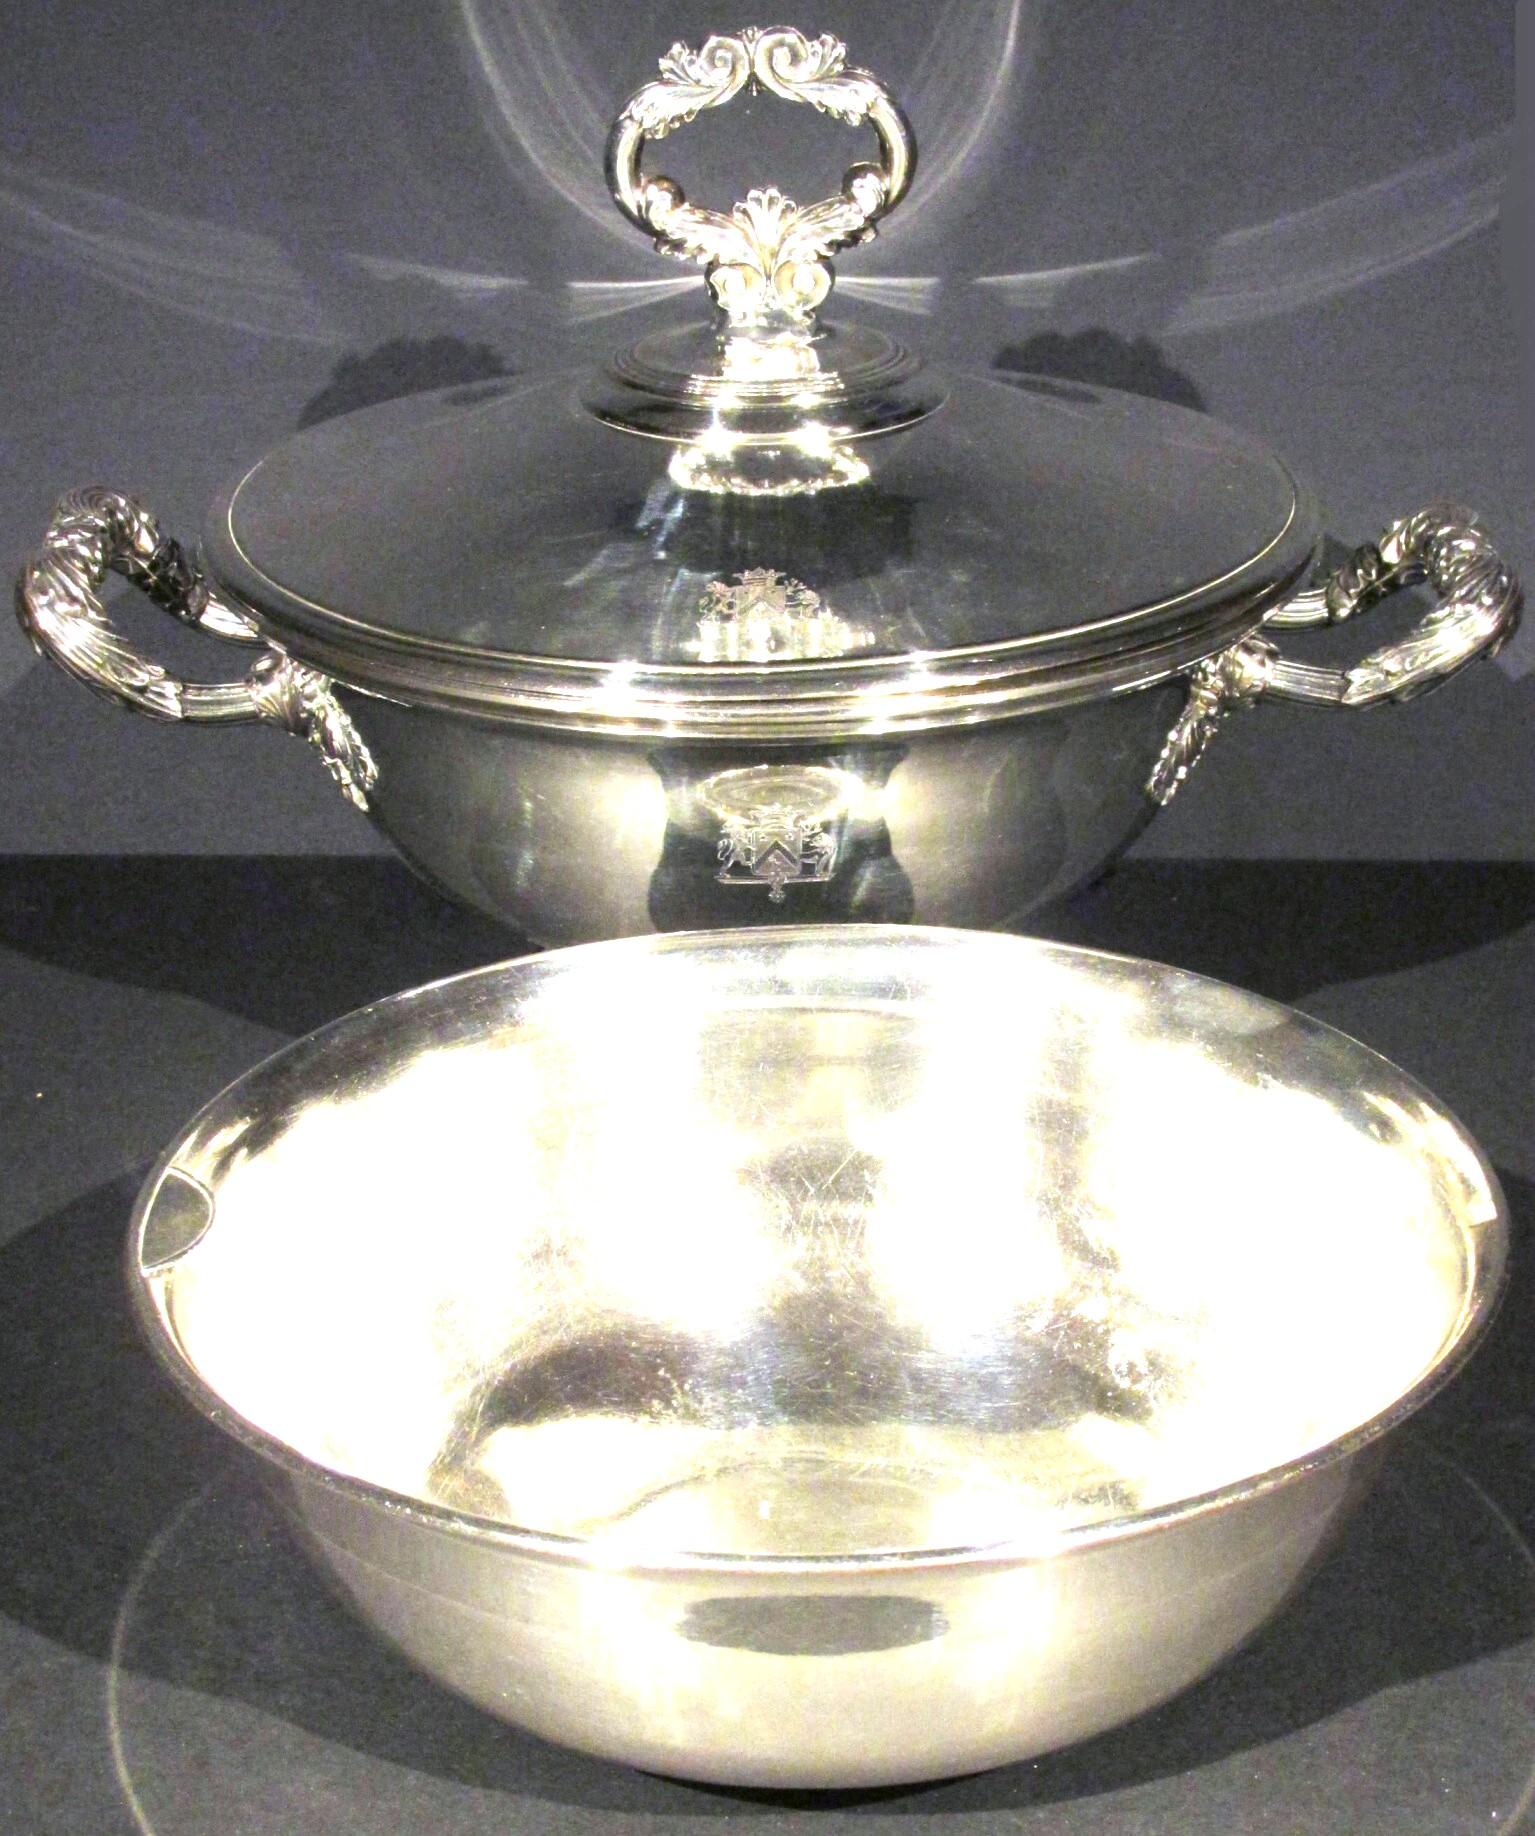 A Rare Early 19th Century Silver Plated Lidded Tureen, France, Circa 1830 In Good Condition For Sale In Ottawa, Ontario